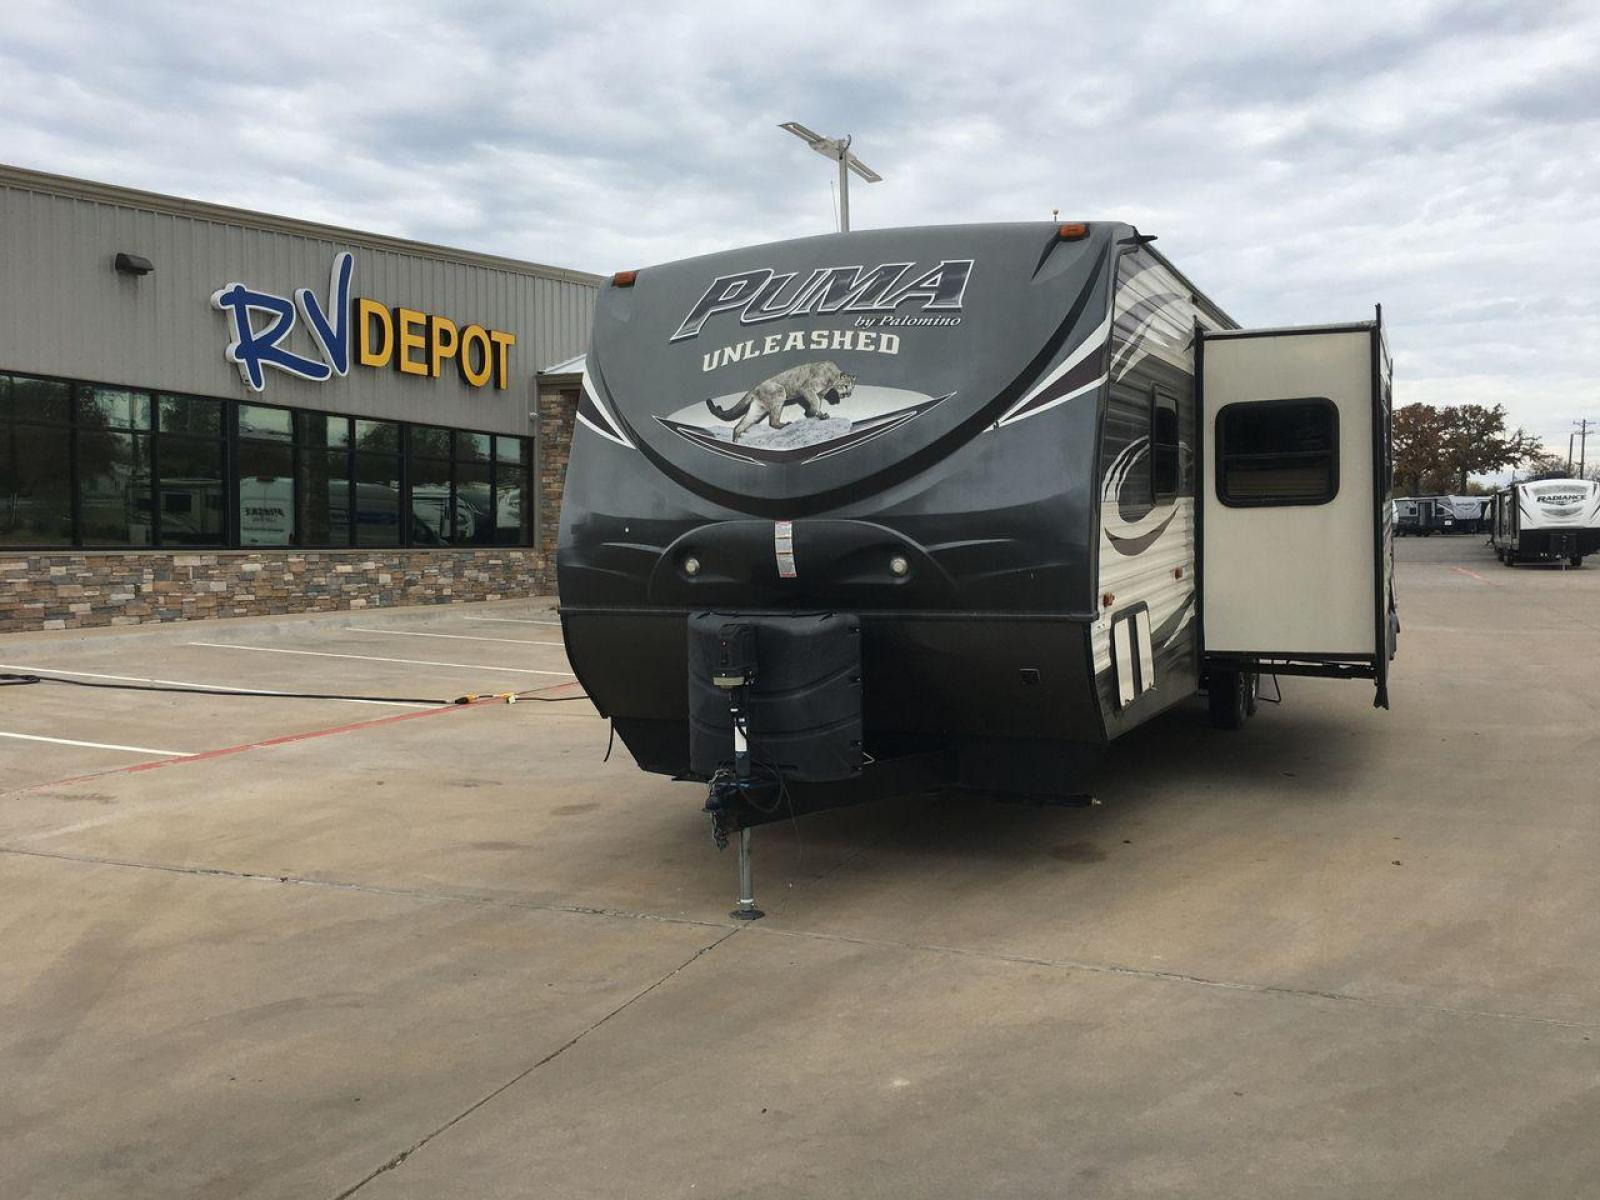 2015 PALOMINO PUMA UNLEASHED 30THS (4X4TPTF22FP) , Length: 35.33 ft. | Dry Weight: 7,345 lbs. | Gross Weight: 10,879 lbs. | Slides: 1 transmission, located at 4319 N Main St, Cleburne, TX, 76033, (817) 678-5133, 32.385960, -97.391212 - The 2015 Palomino Puma Unleashed 30THS is a dual-axle steel wheel setup measuring 35.33 ft. in length. It has a dry weight of 7,345 lbs. and a GVWR of 10,879 lbs. Its exterior is a base color of tan with cool black graphics. It includes one power slide as well as one 16-foot power awning. This toy h - Photo #2